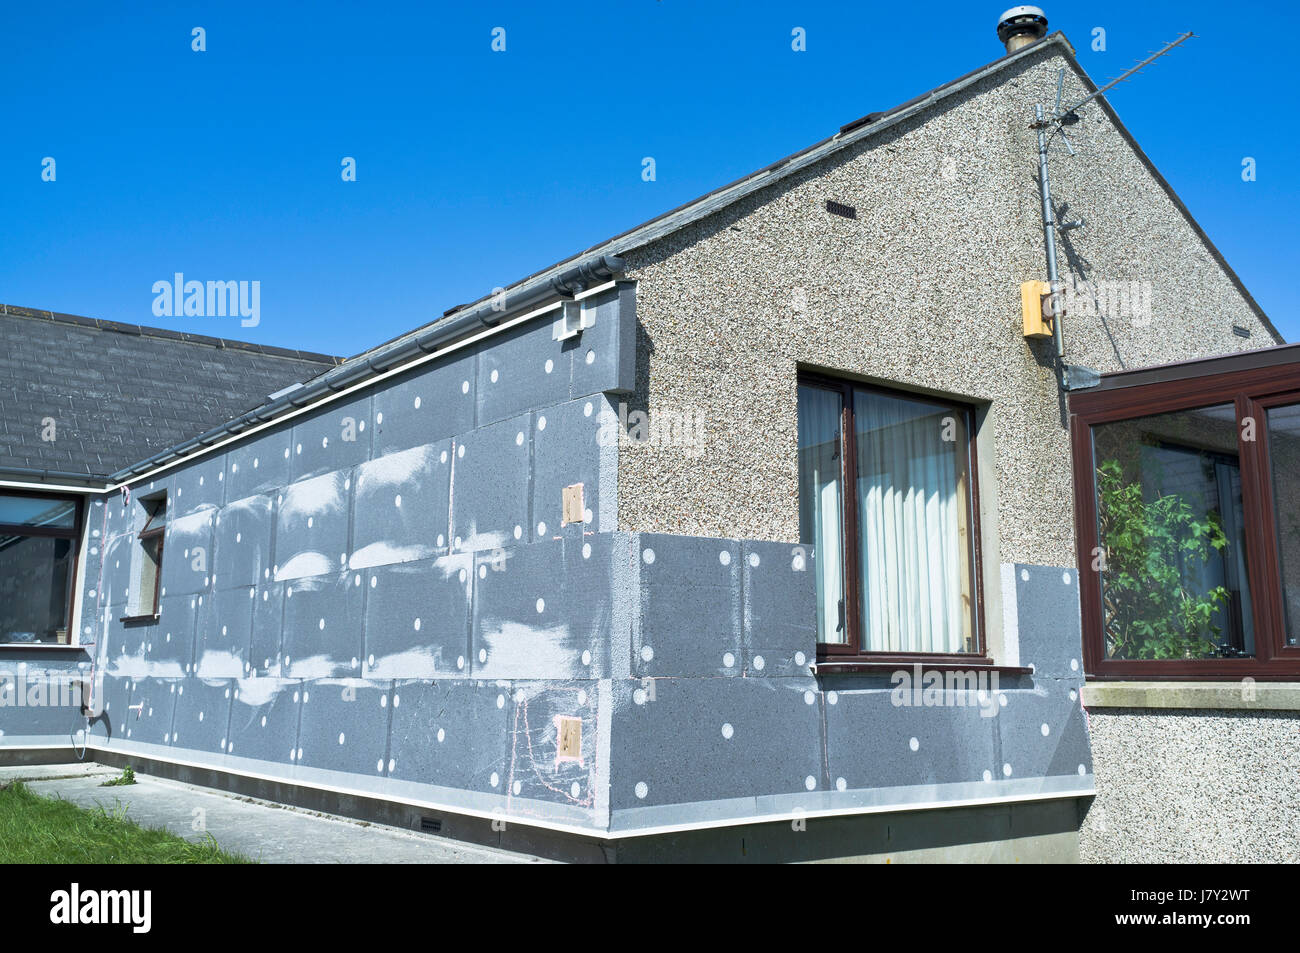 dh Wall Insulation HEATING UK House insulation uk external wall thermal insulating exterior walls outside home britain foam facade Stock Photo